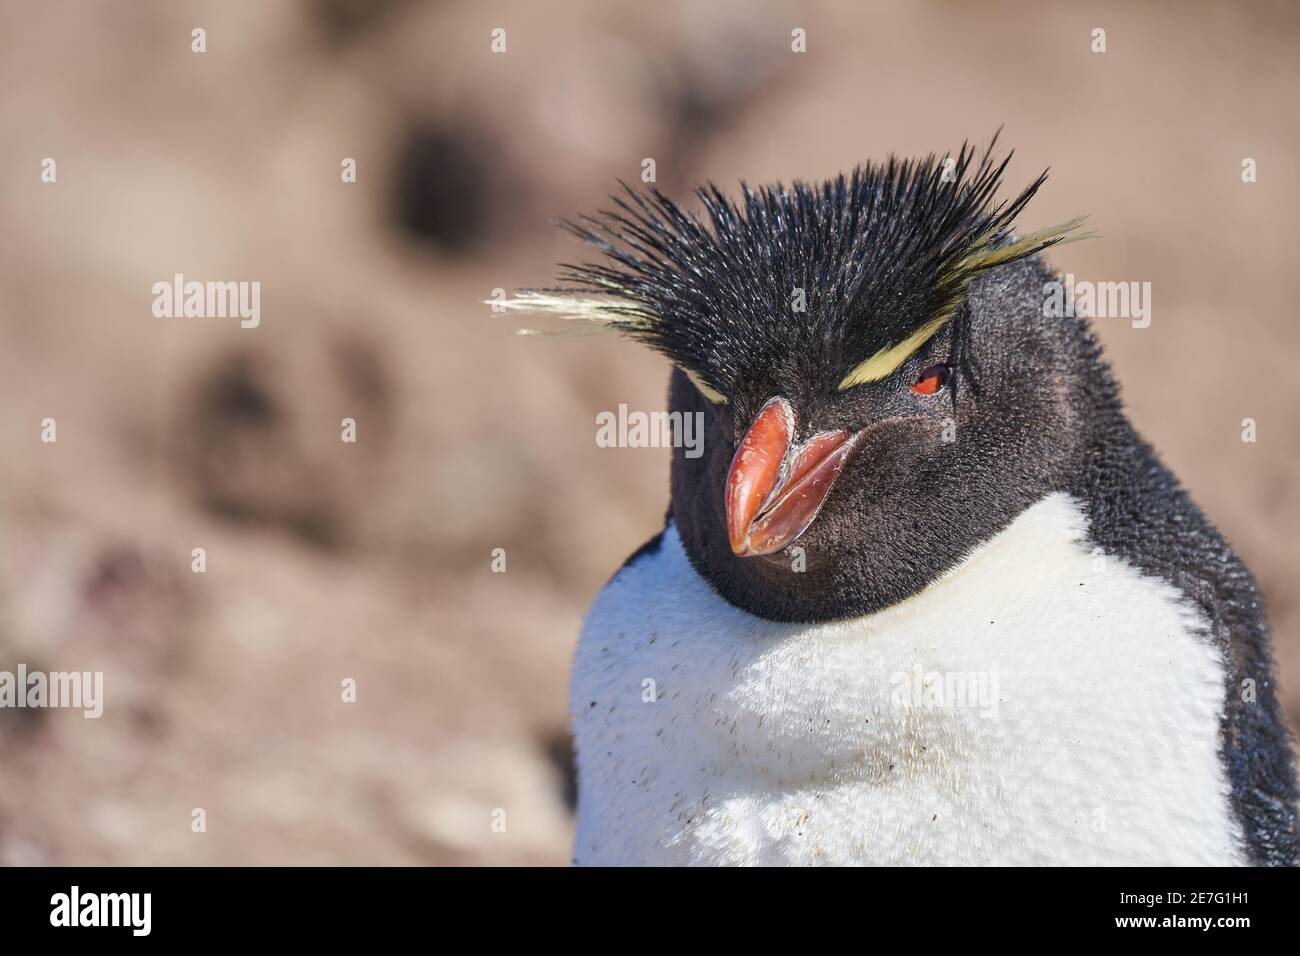 Eudyptes chrysocome is the rock hopper penguin also known as crested penguin living on the rocky and steep cliffs of isla pinguino at the atlantic coa Stock Photo